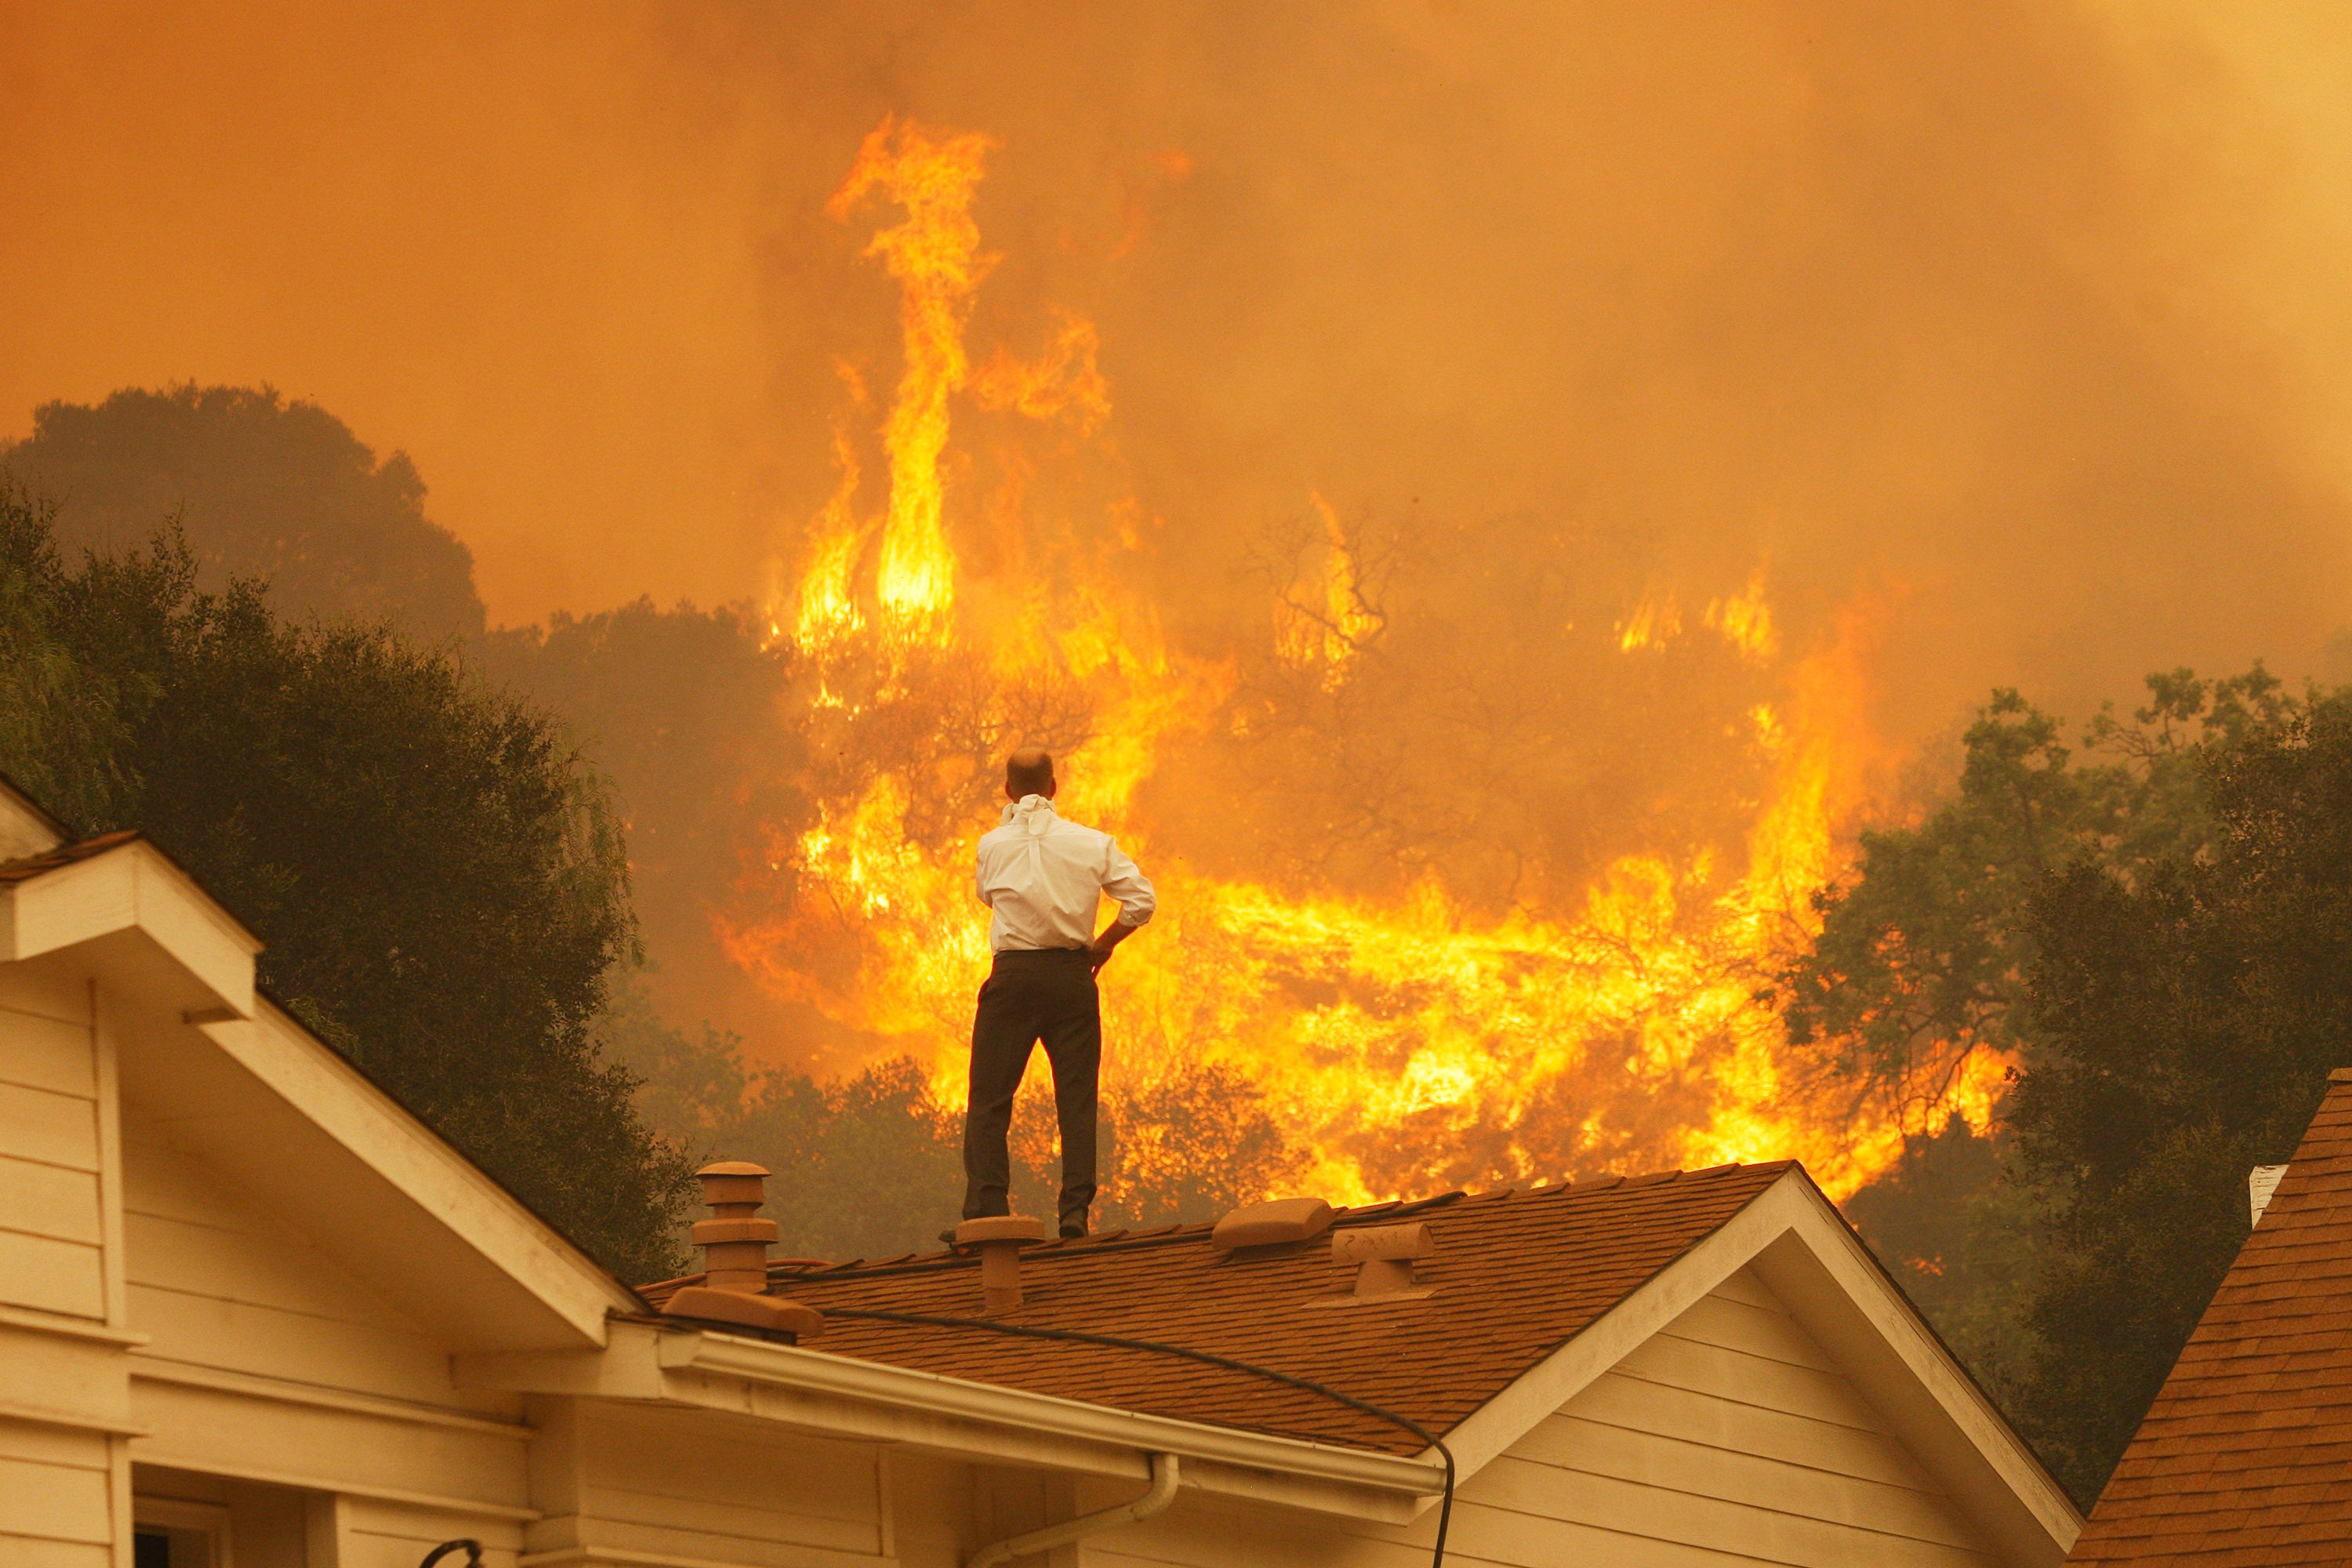 The climate crisis has seen adverse natural disasters this year including the astonishing wildfires in California